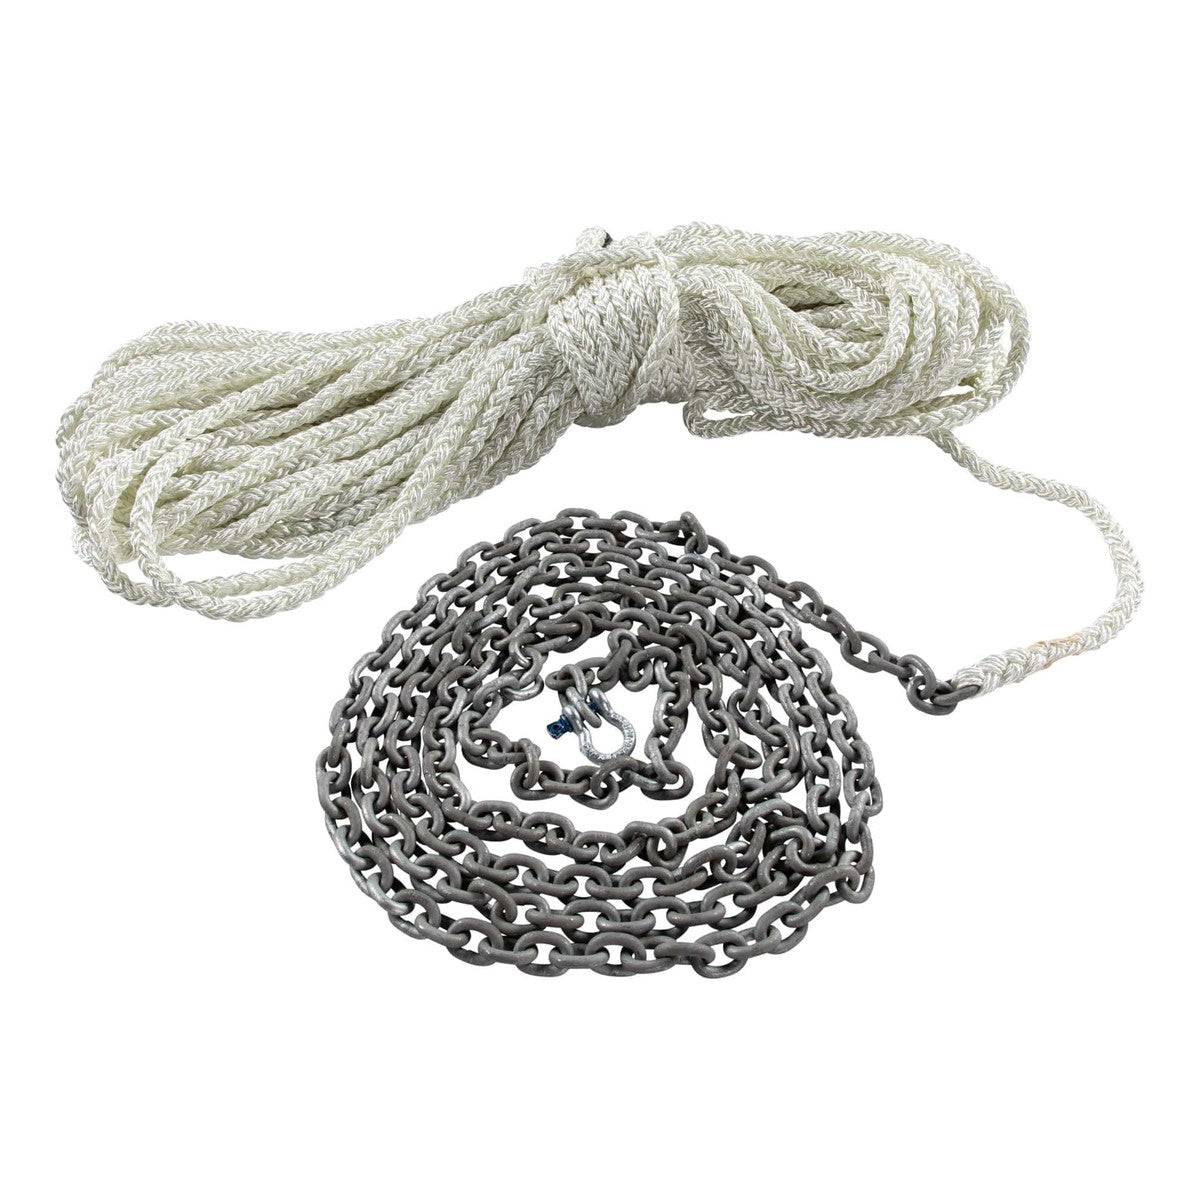 Lewmar Oversized - Not Qualified for Free Shipping Lewmar 10' 1/4" G4 Chain & 1/2" 8-Plait Rope #HM10HT200PX